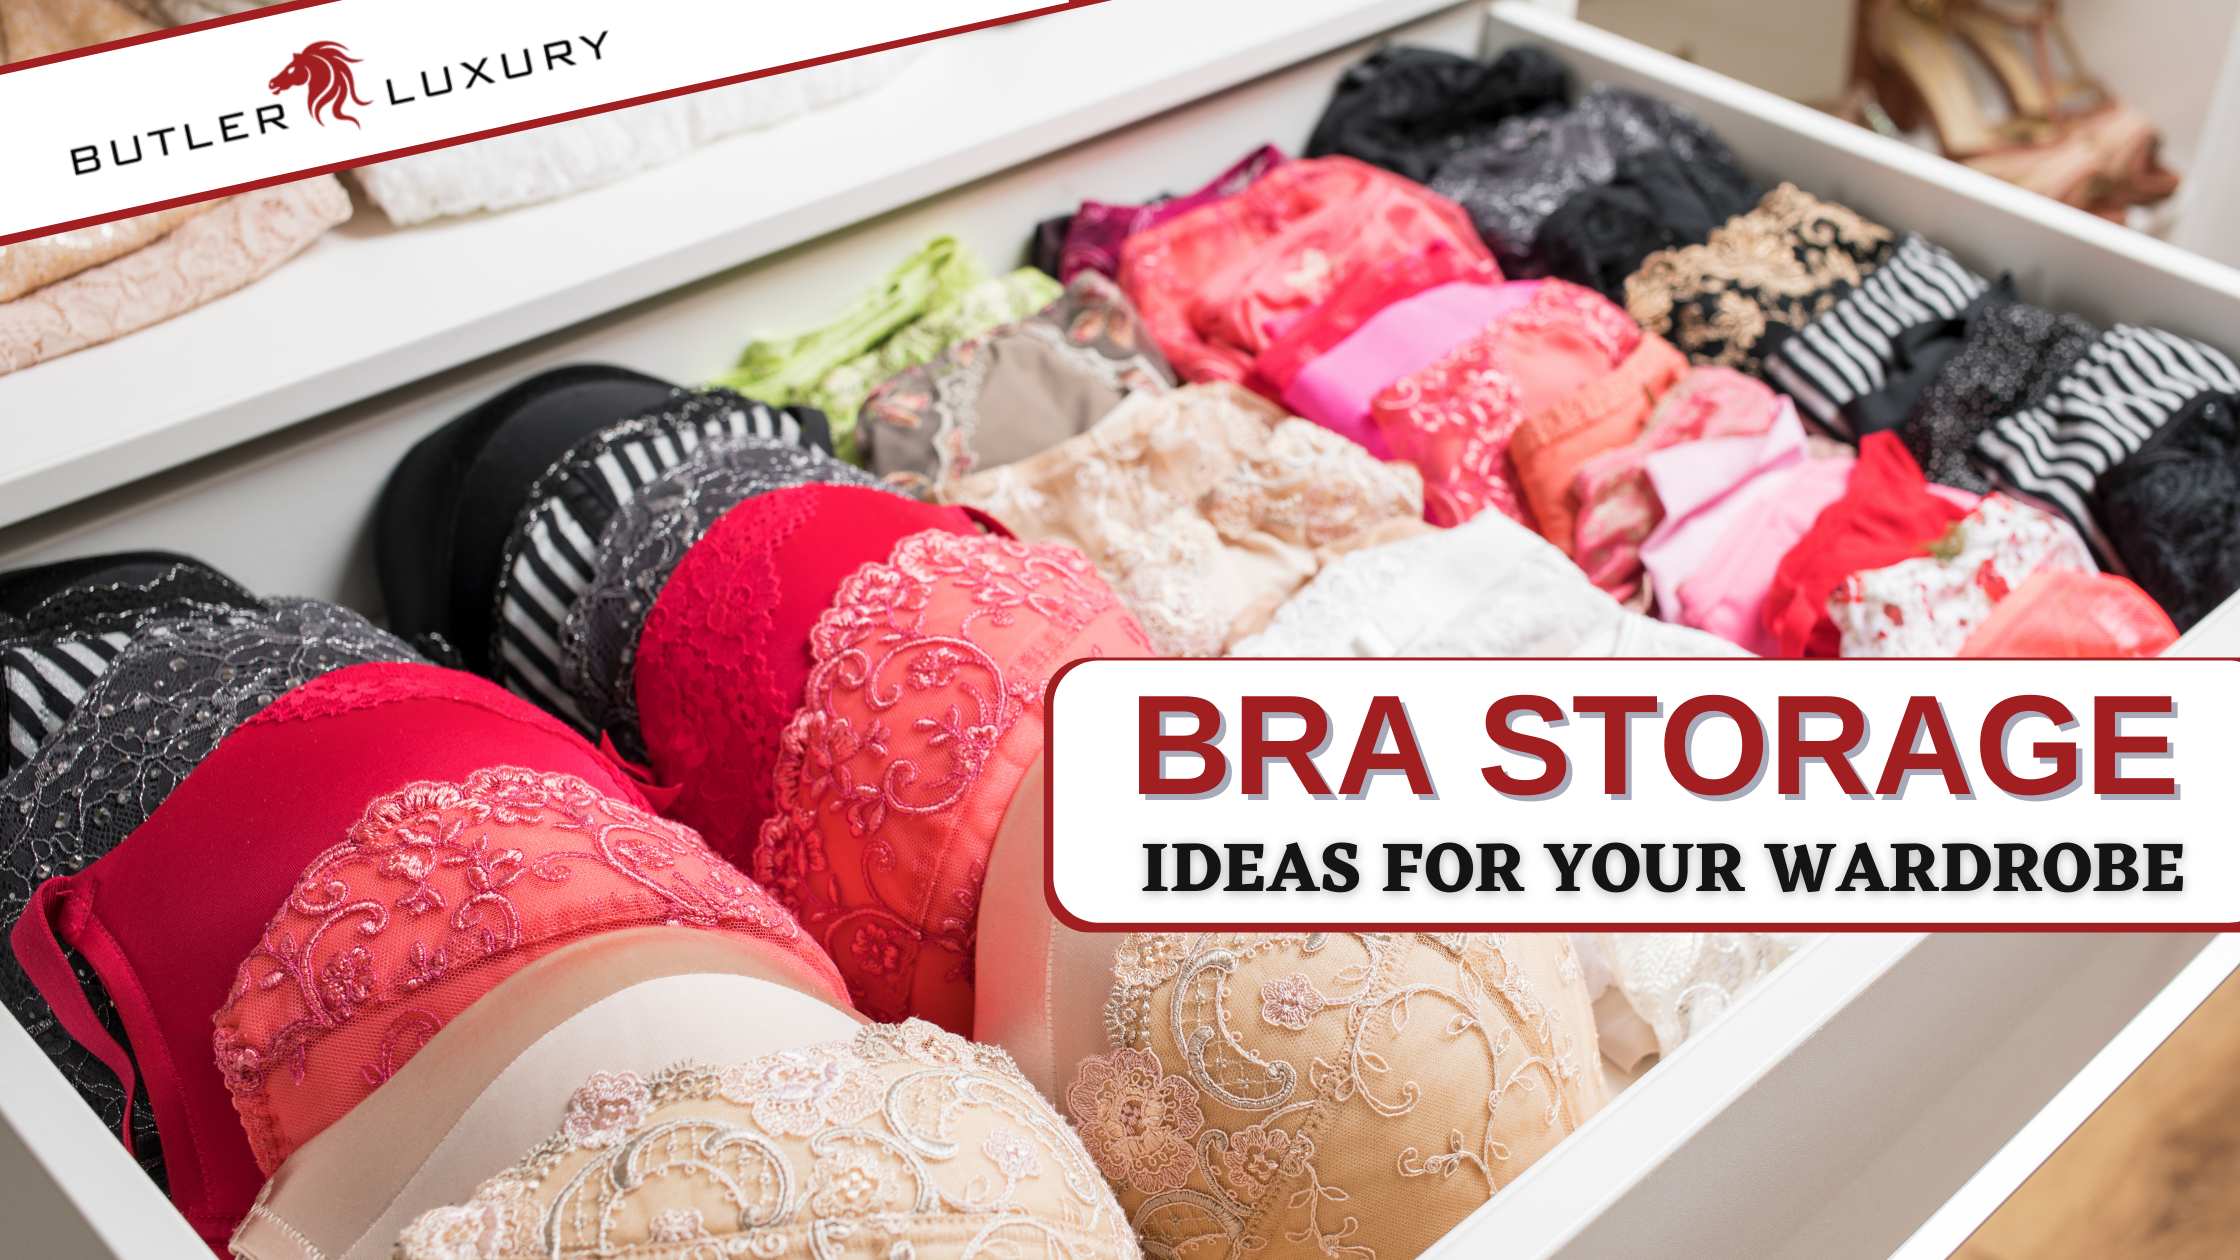 Bring Order to Your Intimates With These Five Bra Storage Ideas - Butler  Luxury